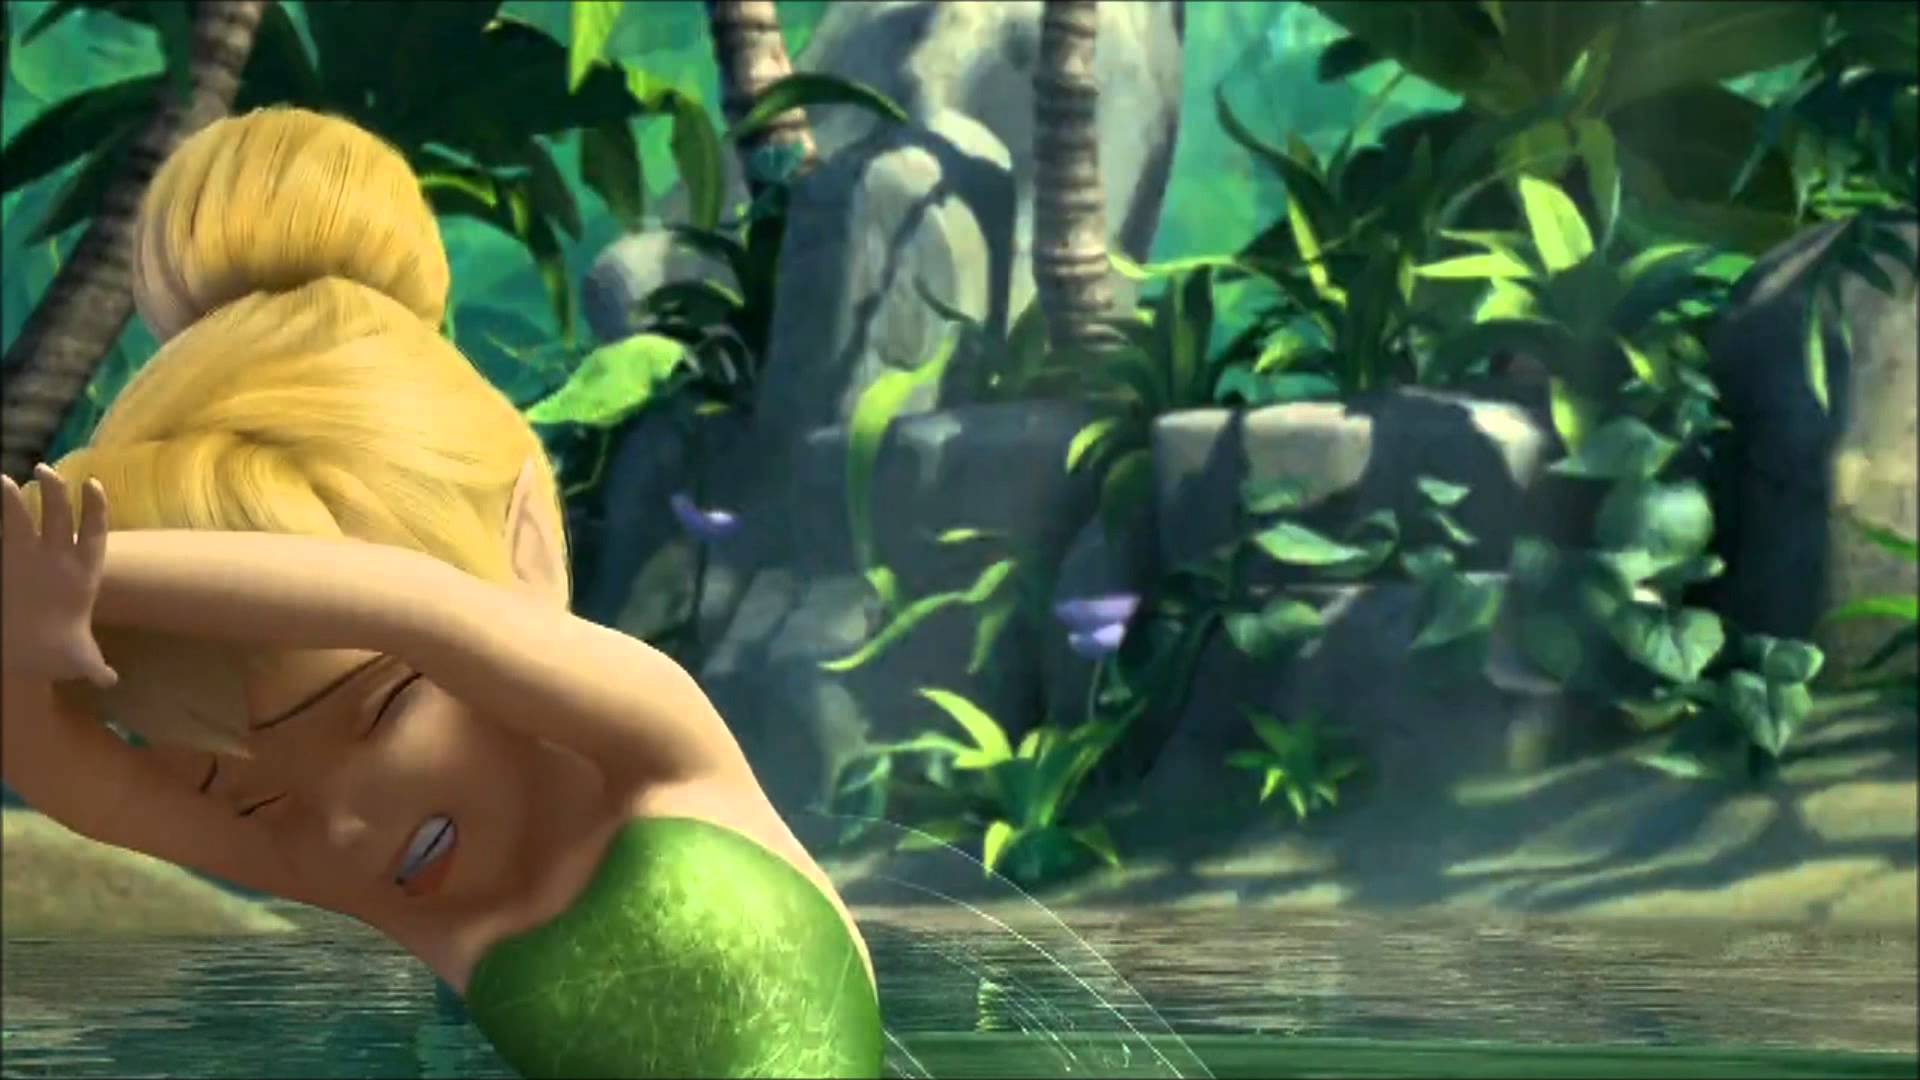 Best scenes from Tinker Bell movie